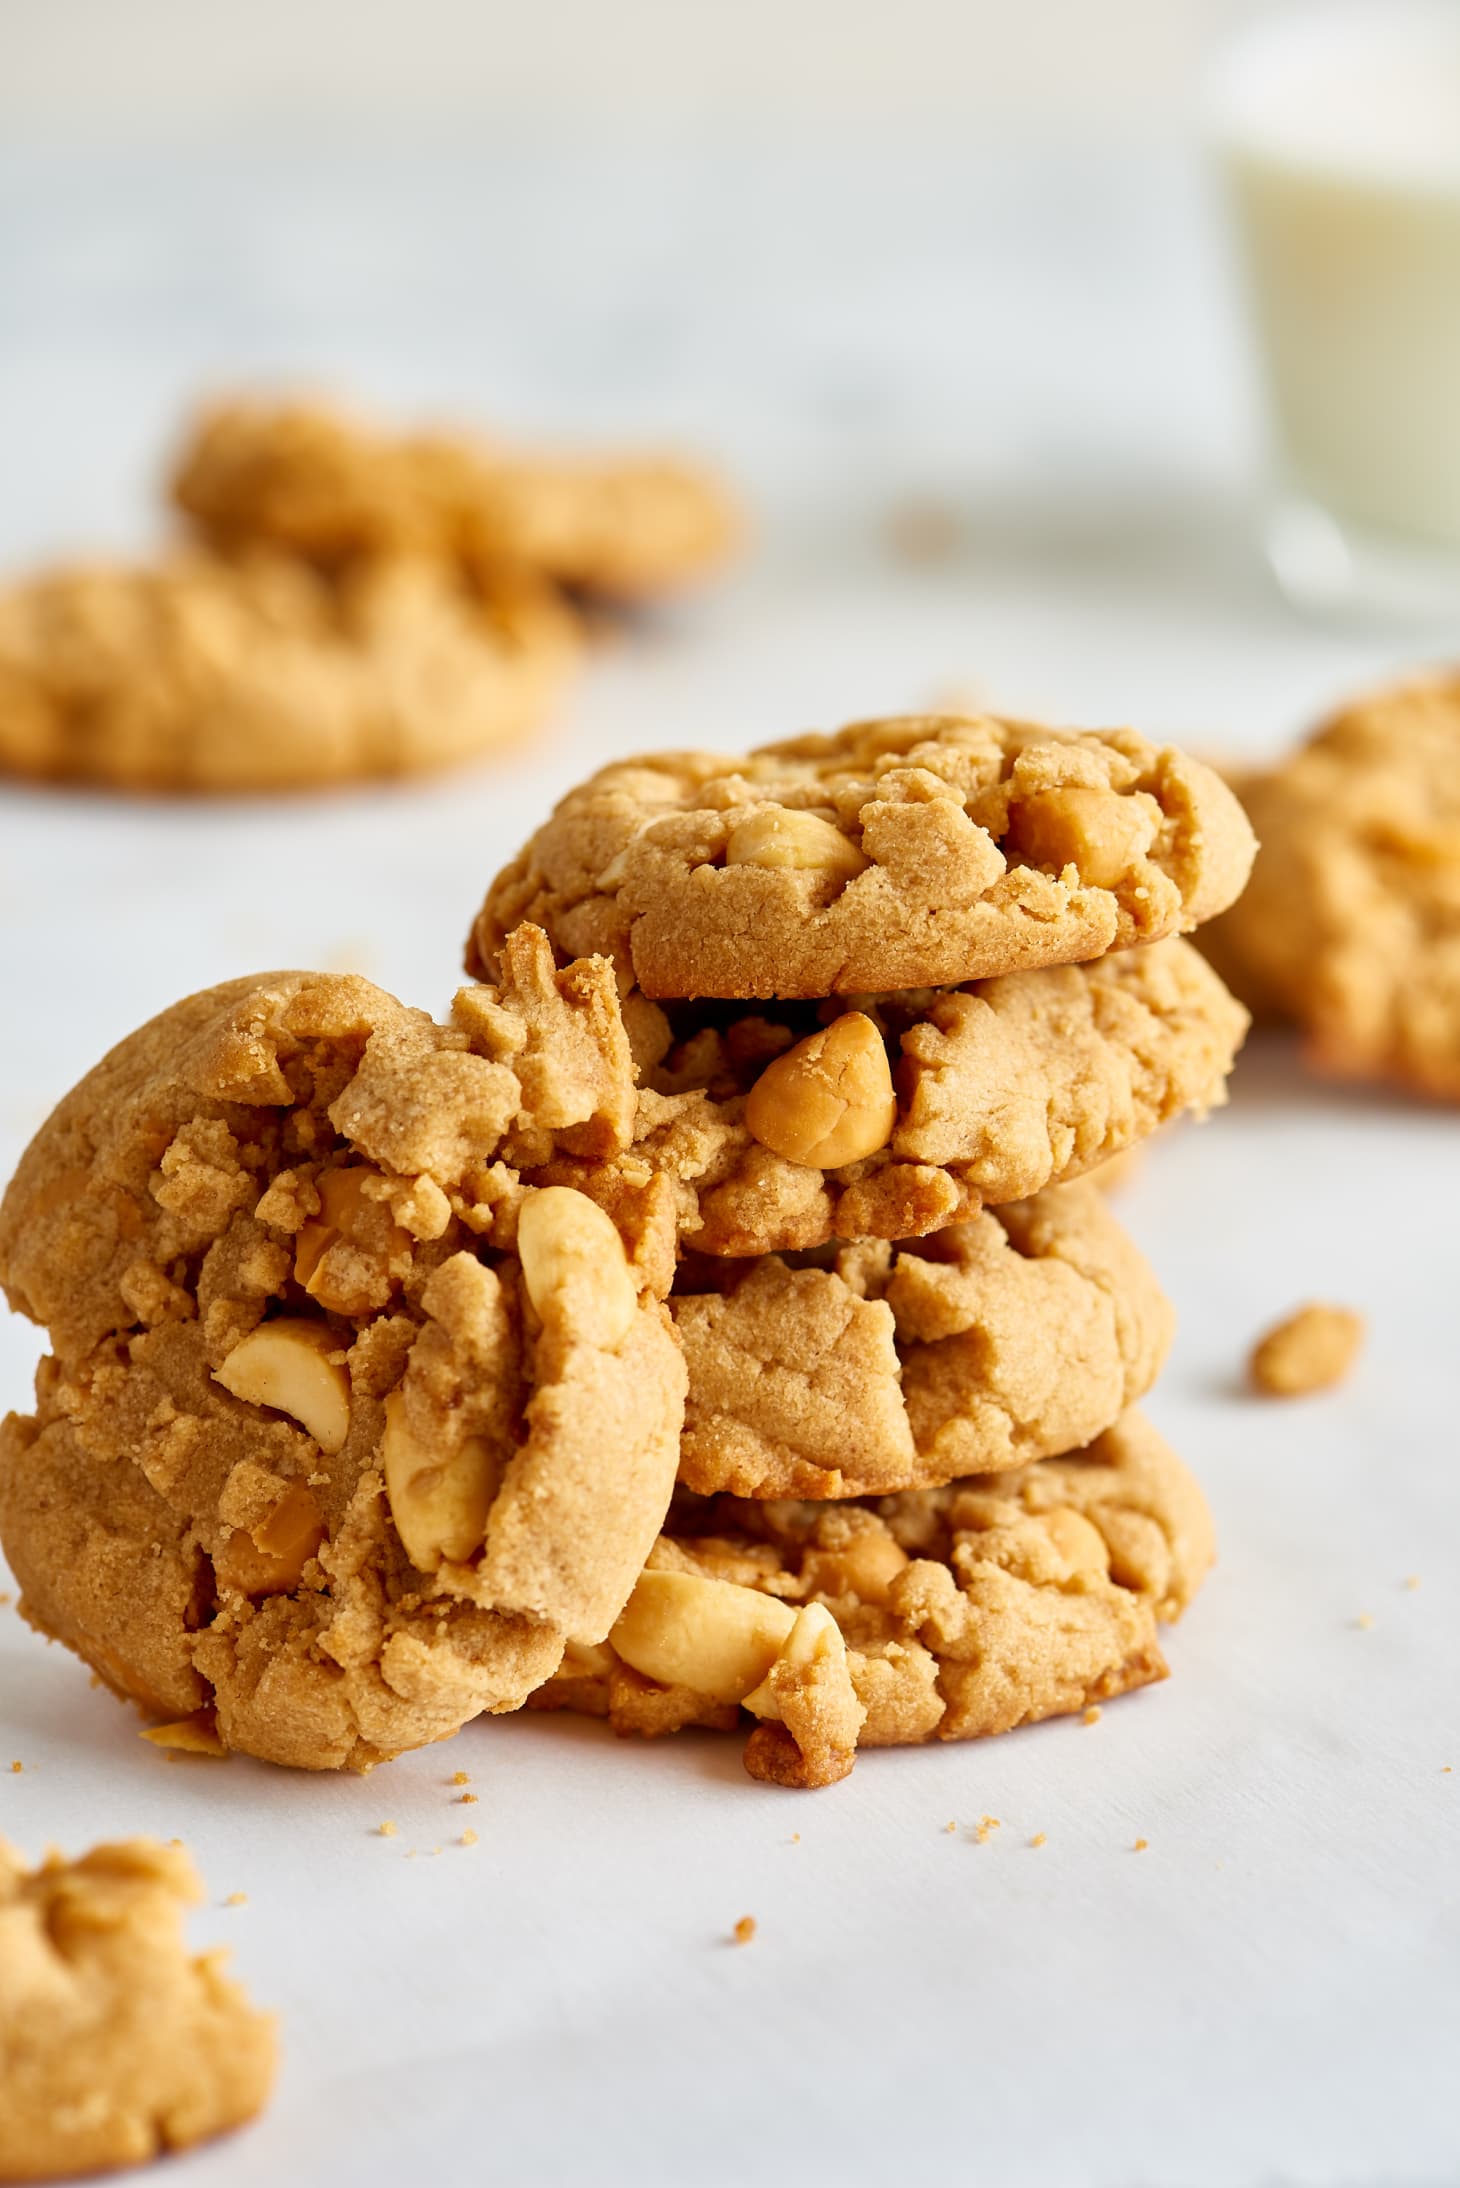 How To Make Soft &amp; Chewy Peanut Butter Cookies | Kitchn